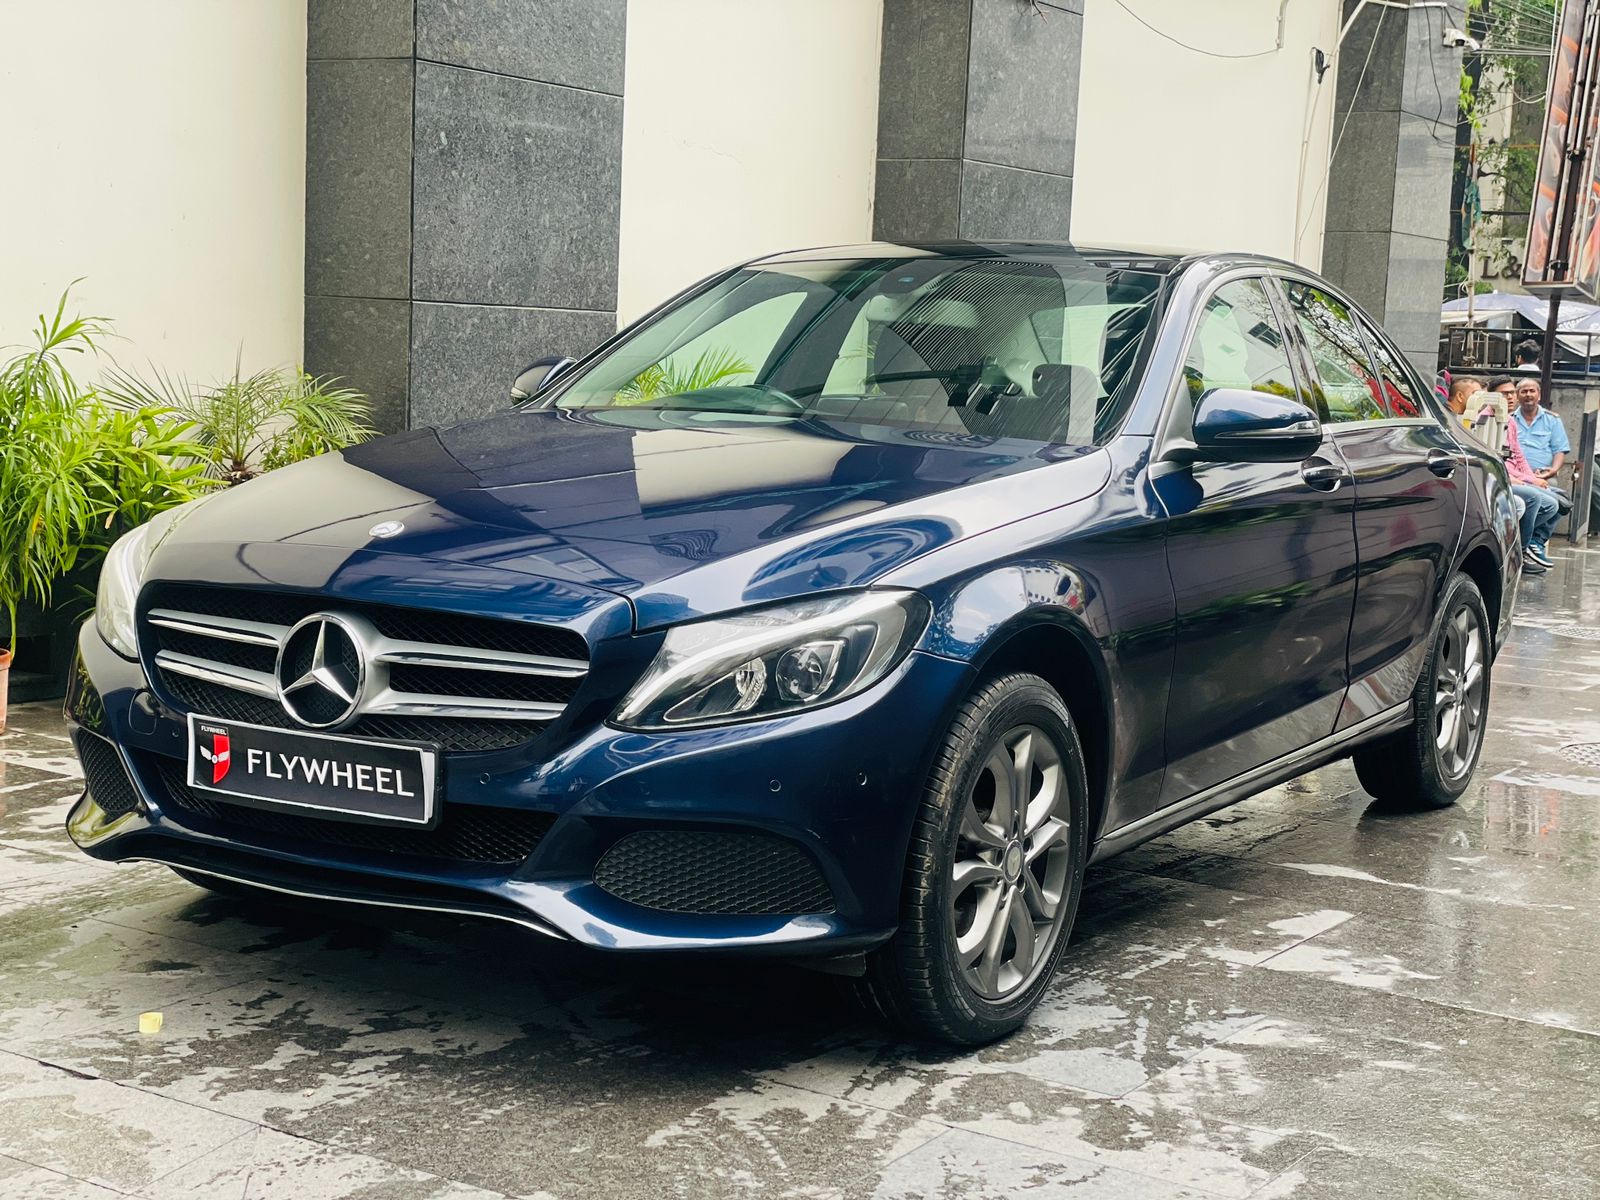 Mercedes Benz C220D 2016: A Blend of Luxury and Performance